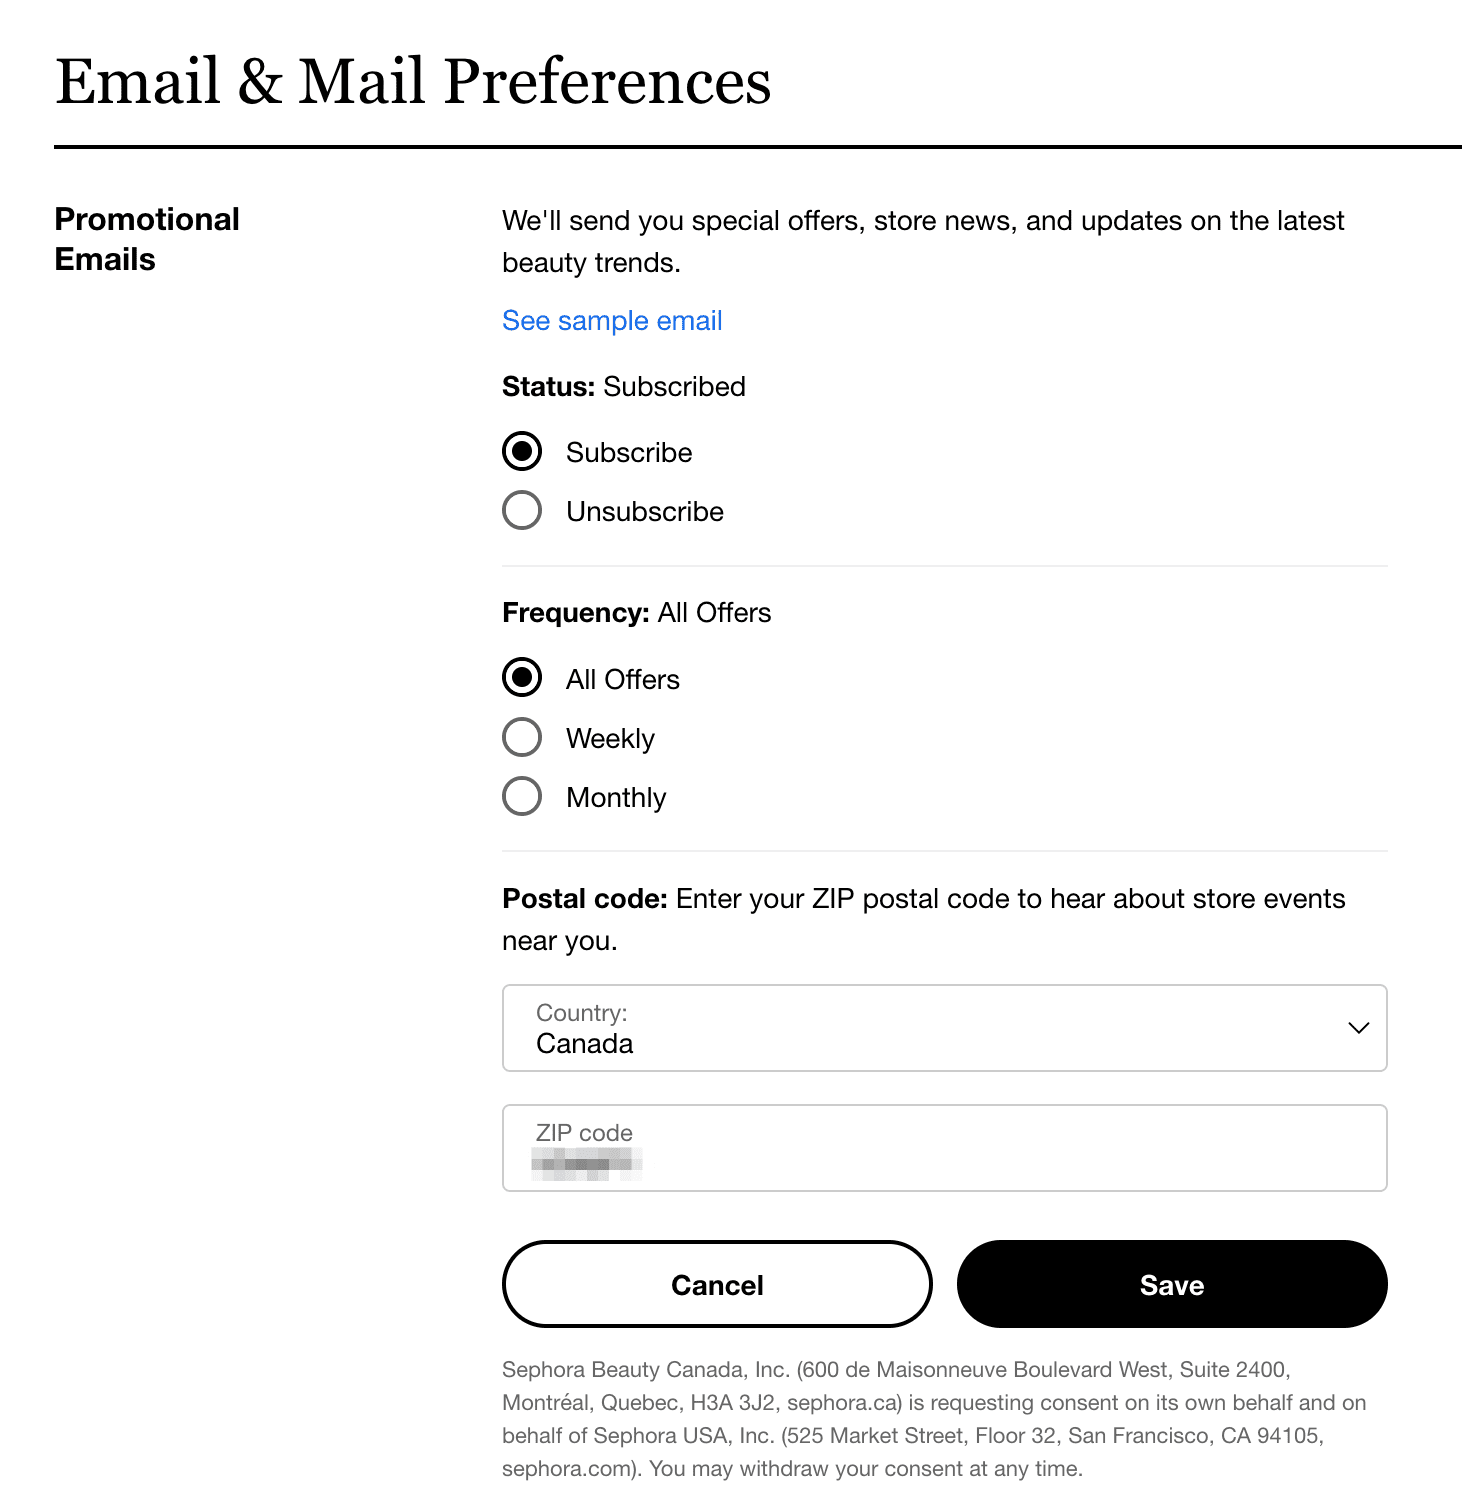 Email preferences form example